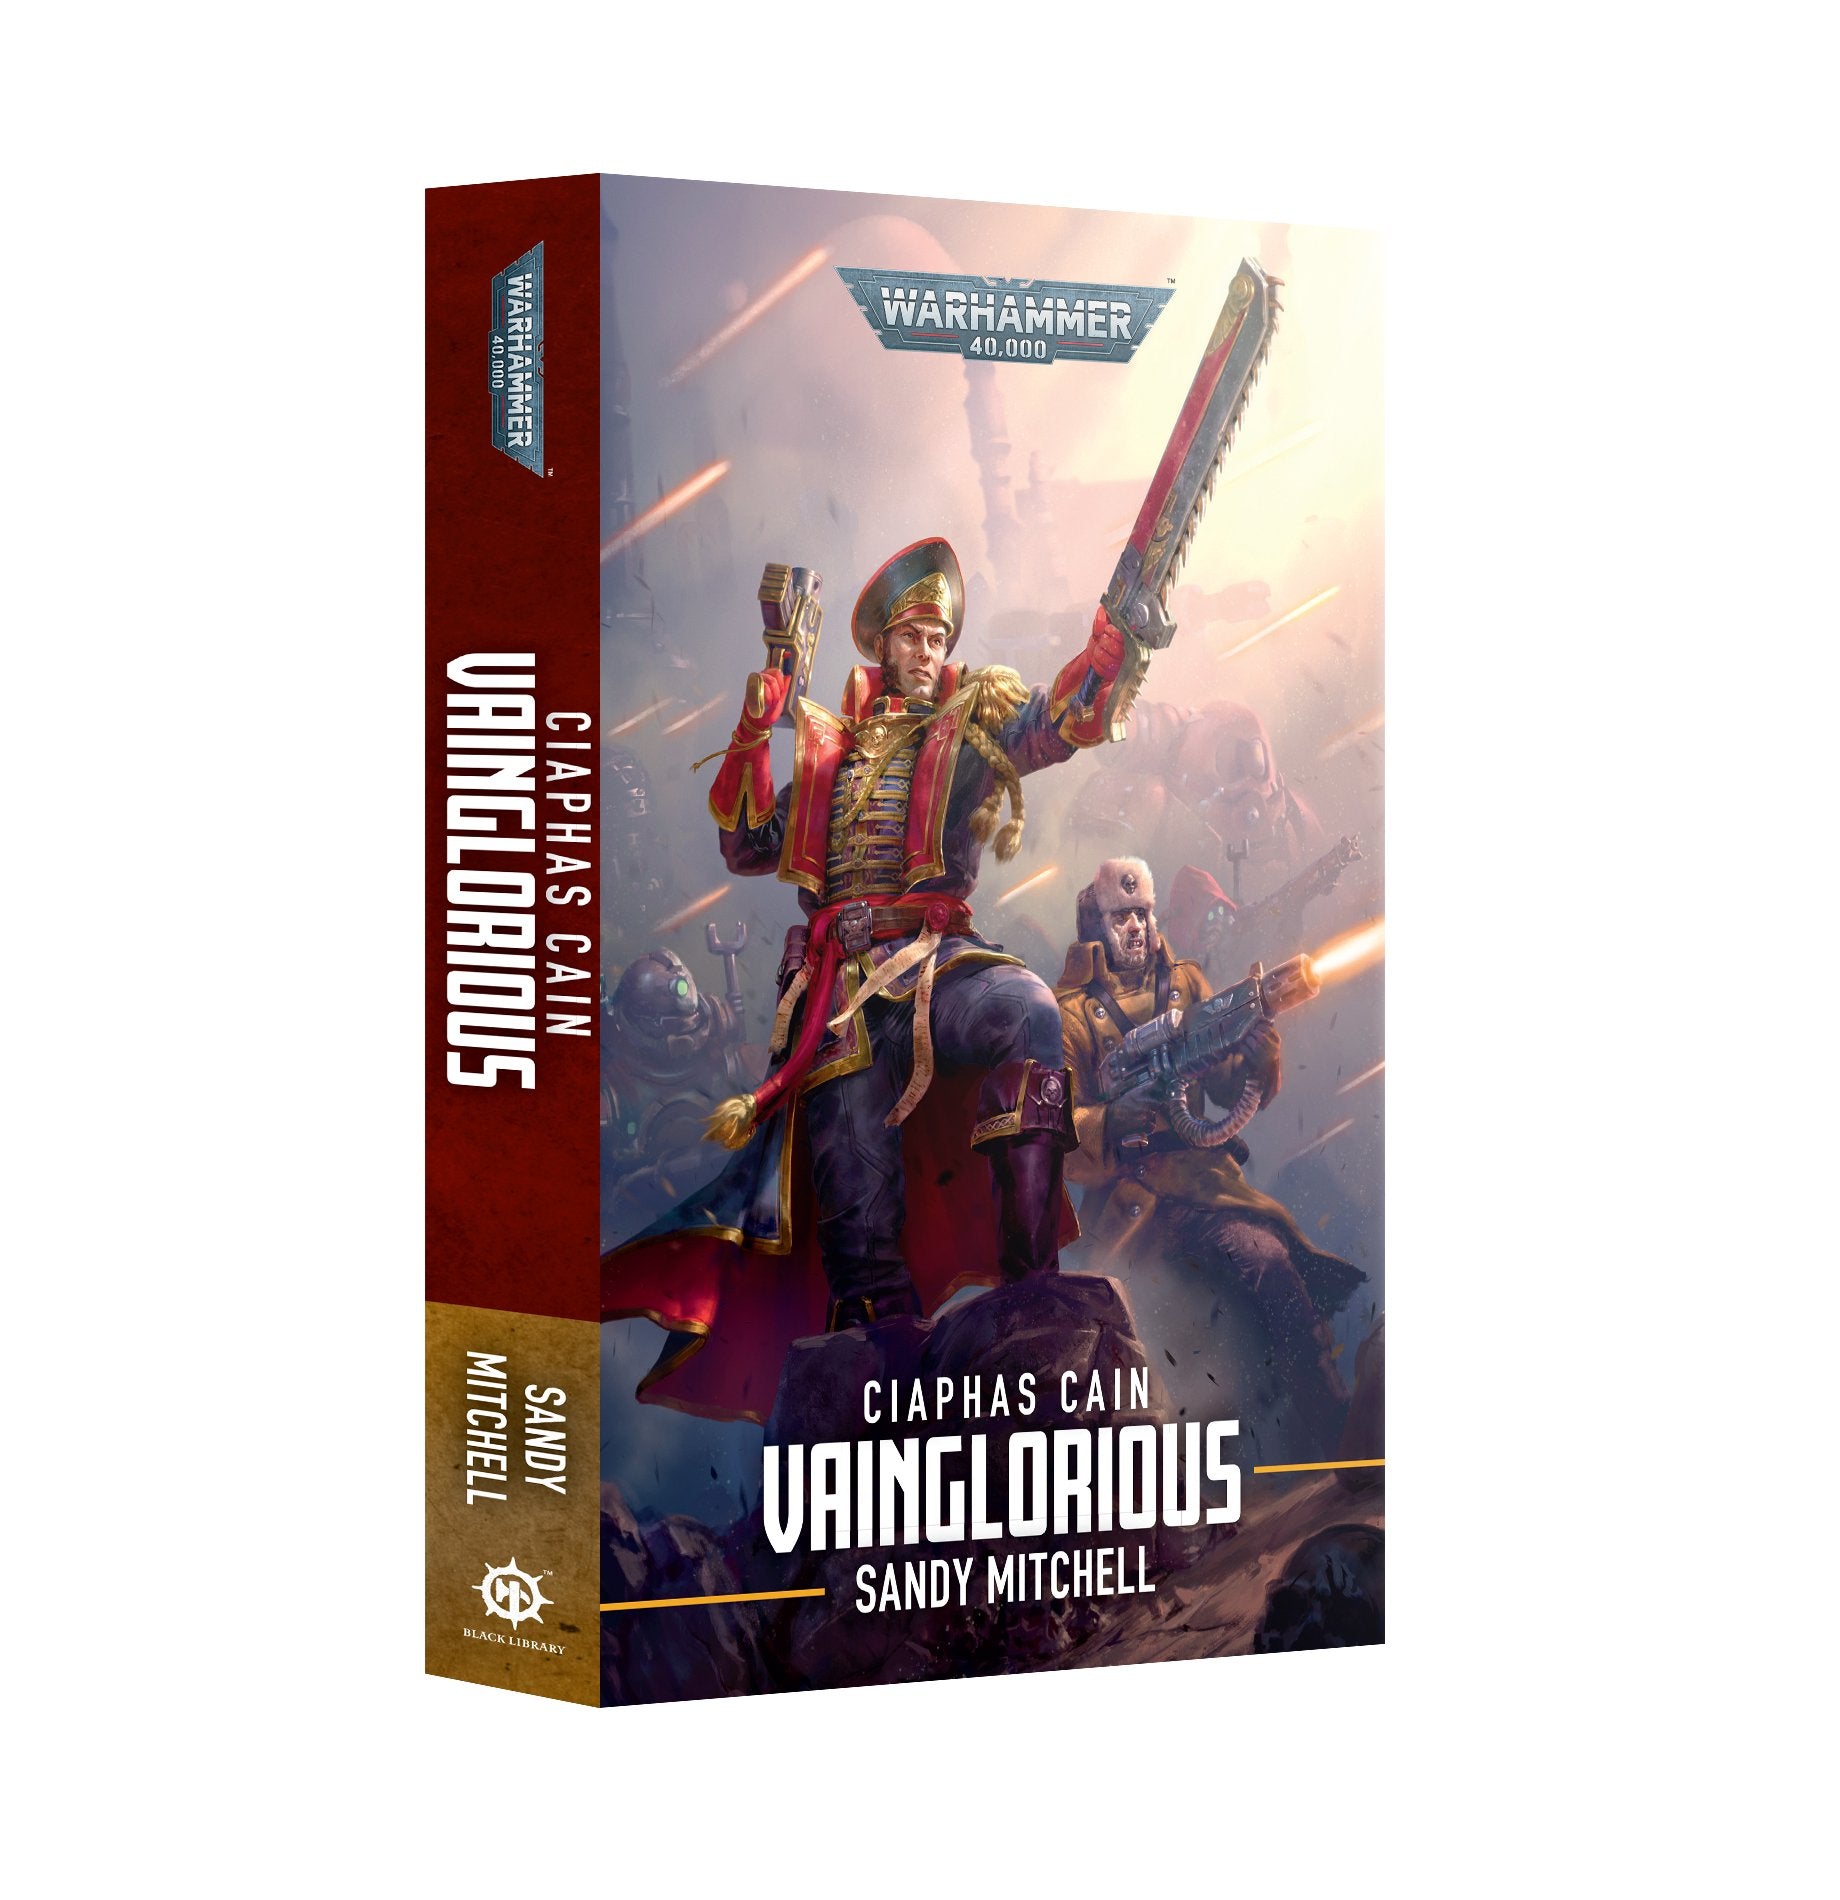 Ciaphas Cain: Vainglorious (Paperback) - Release Date 18/5/24 - Loaded Dice